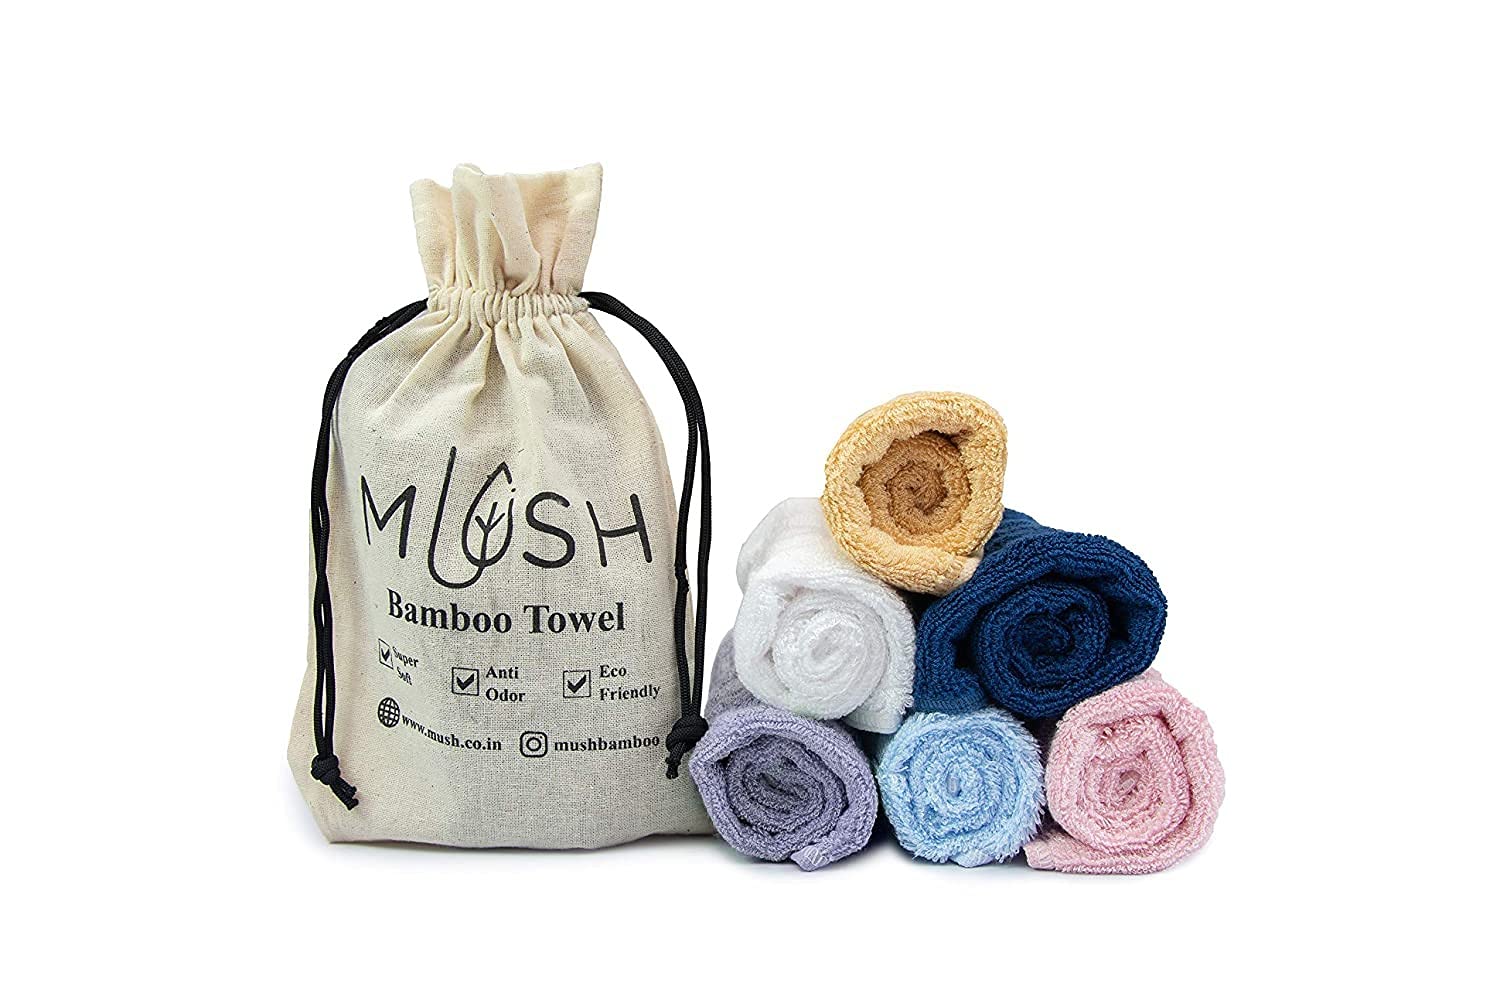 Mush 100% Bamboo Face Towel | Ultra Soft, Absorbent, & Quick Dry Towels for Facewash, Gym, Travel | Suitable for Sensitive/Acne Prone Skin | 13 x 13 Inches | 500 GSM Pack of 3